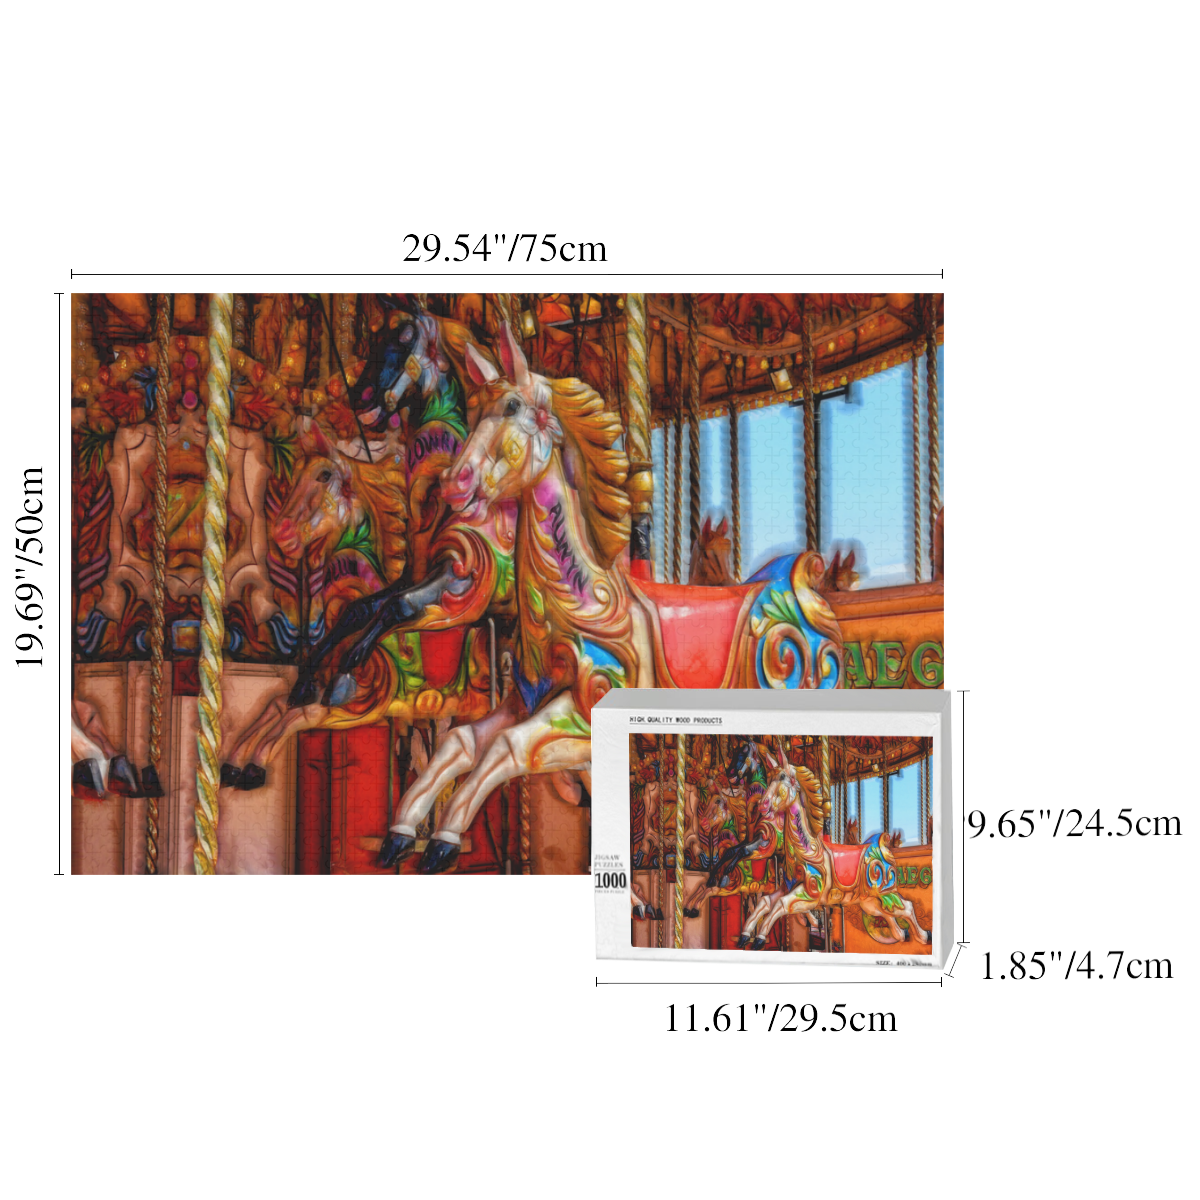 Take A Ride On The Merry-go-round 1000-Piece Wooden Photo Puzzles